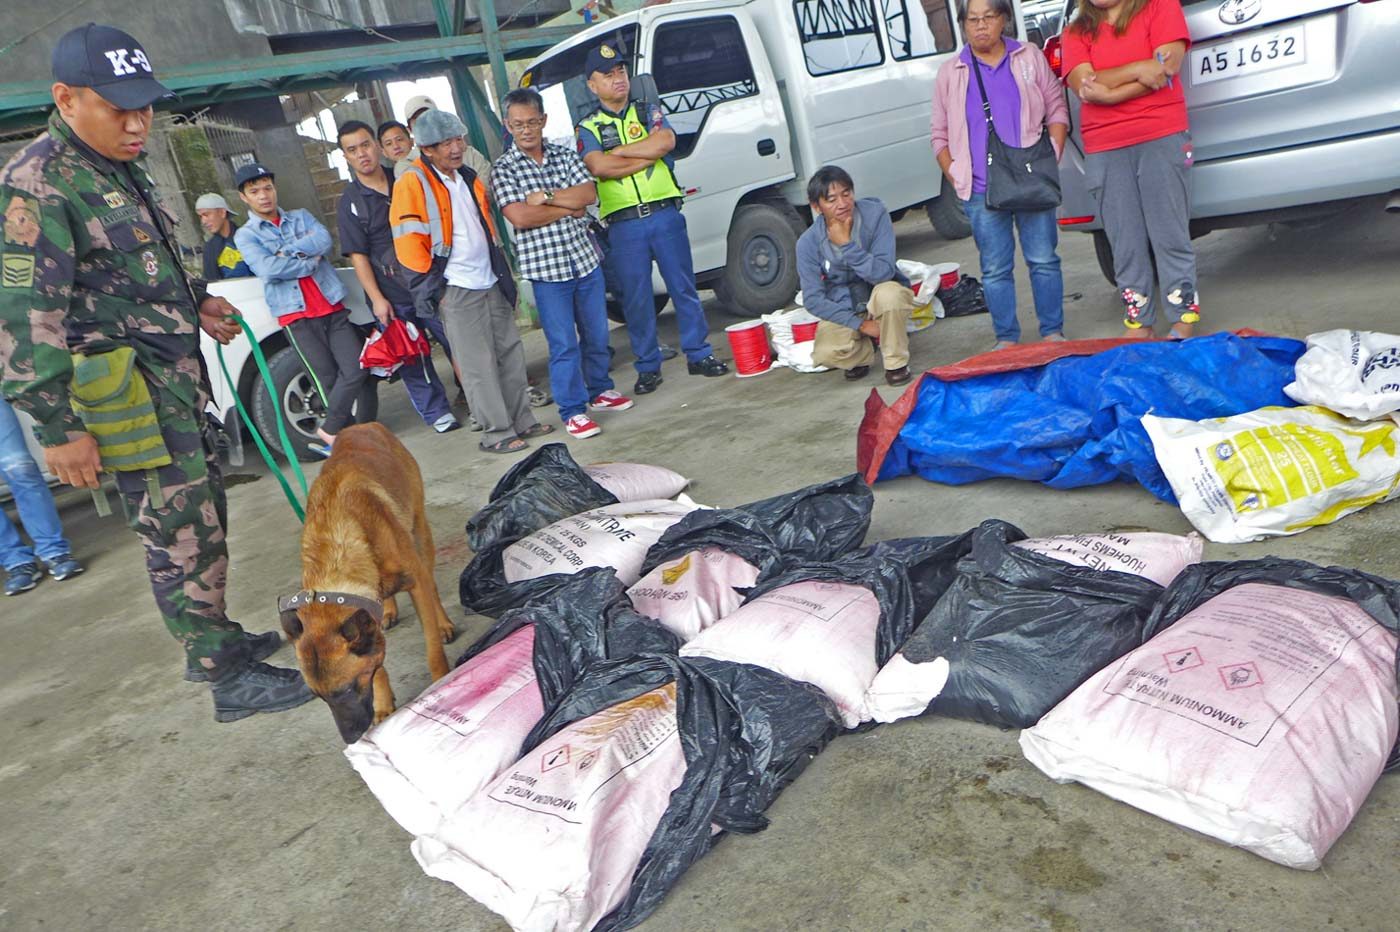 Police recover dynamite, bomb materiel stolen from Benguet mining depot